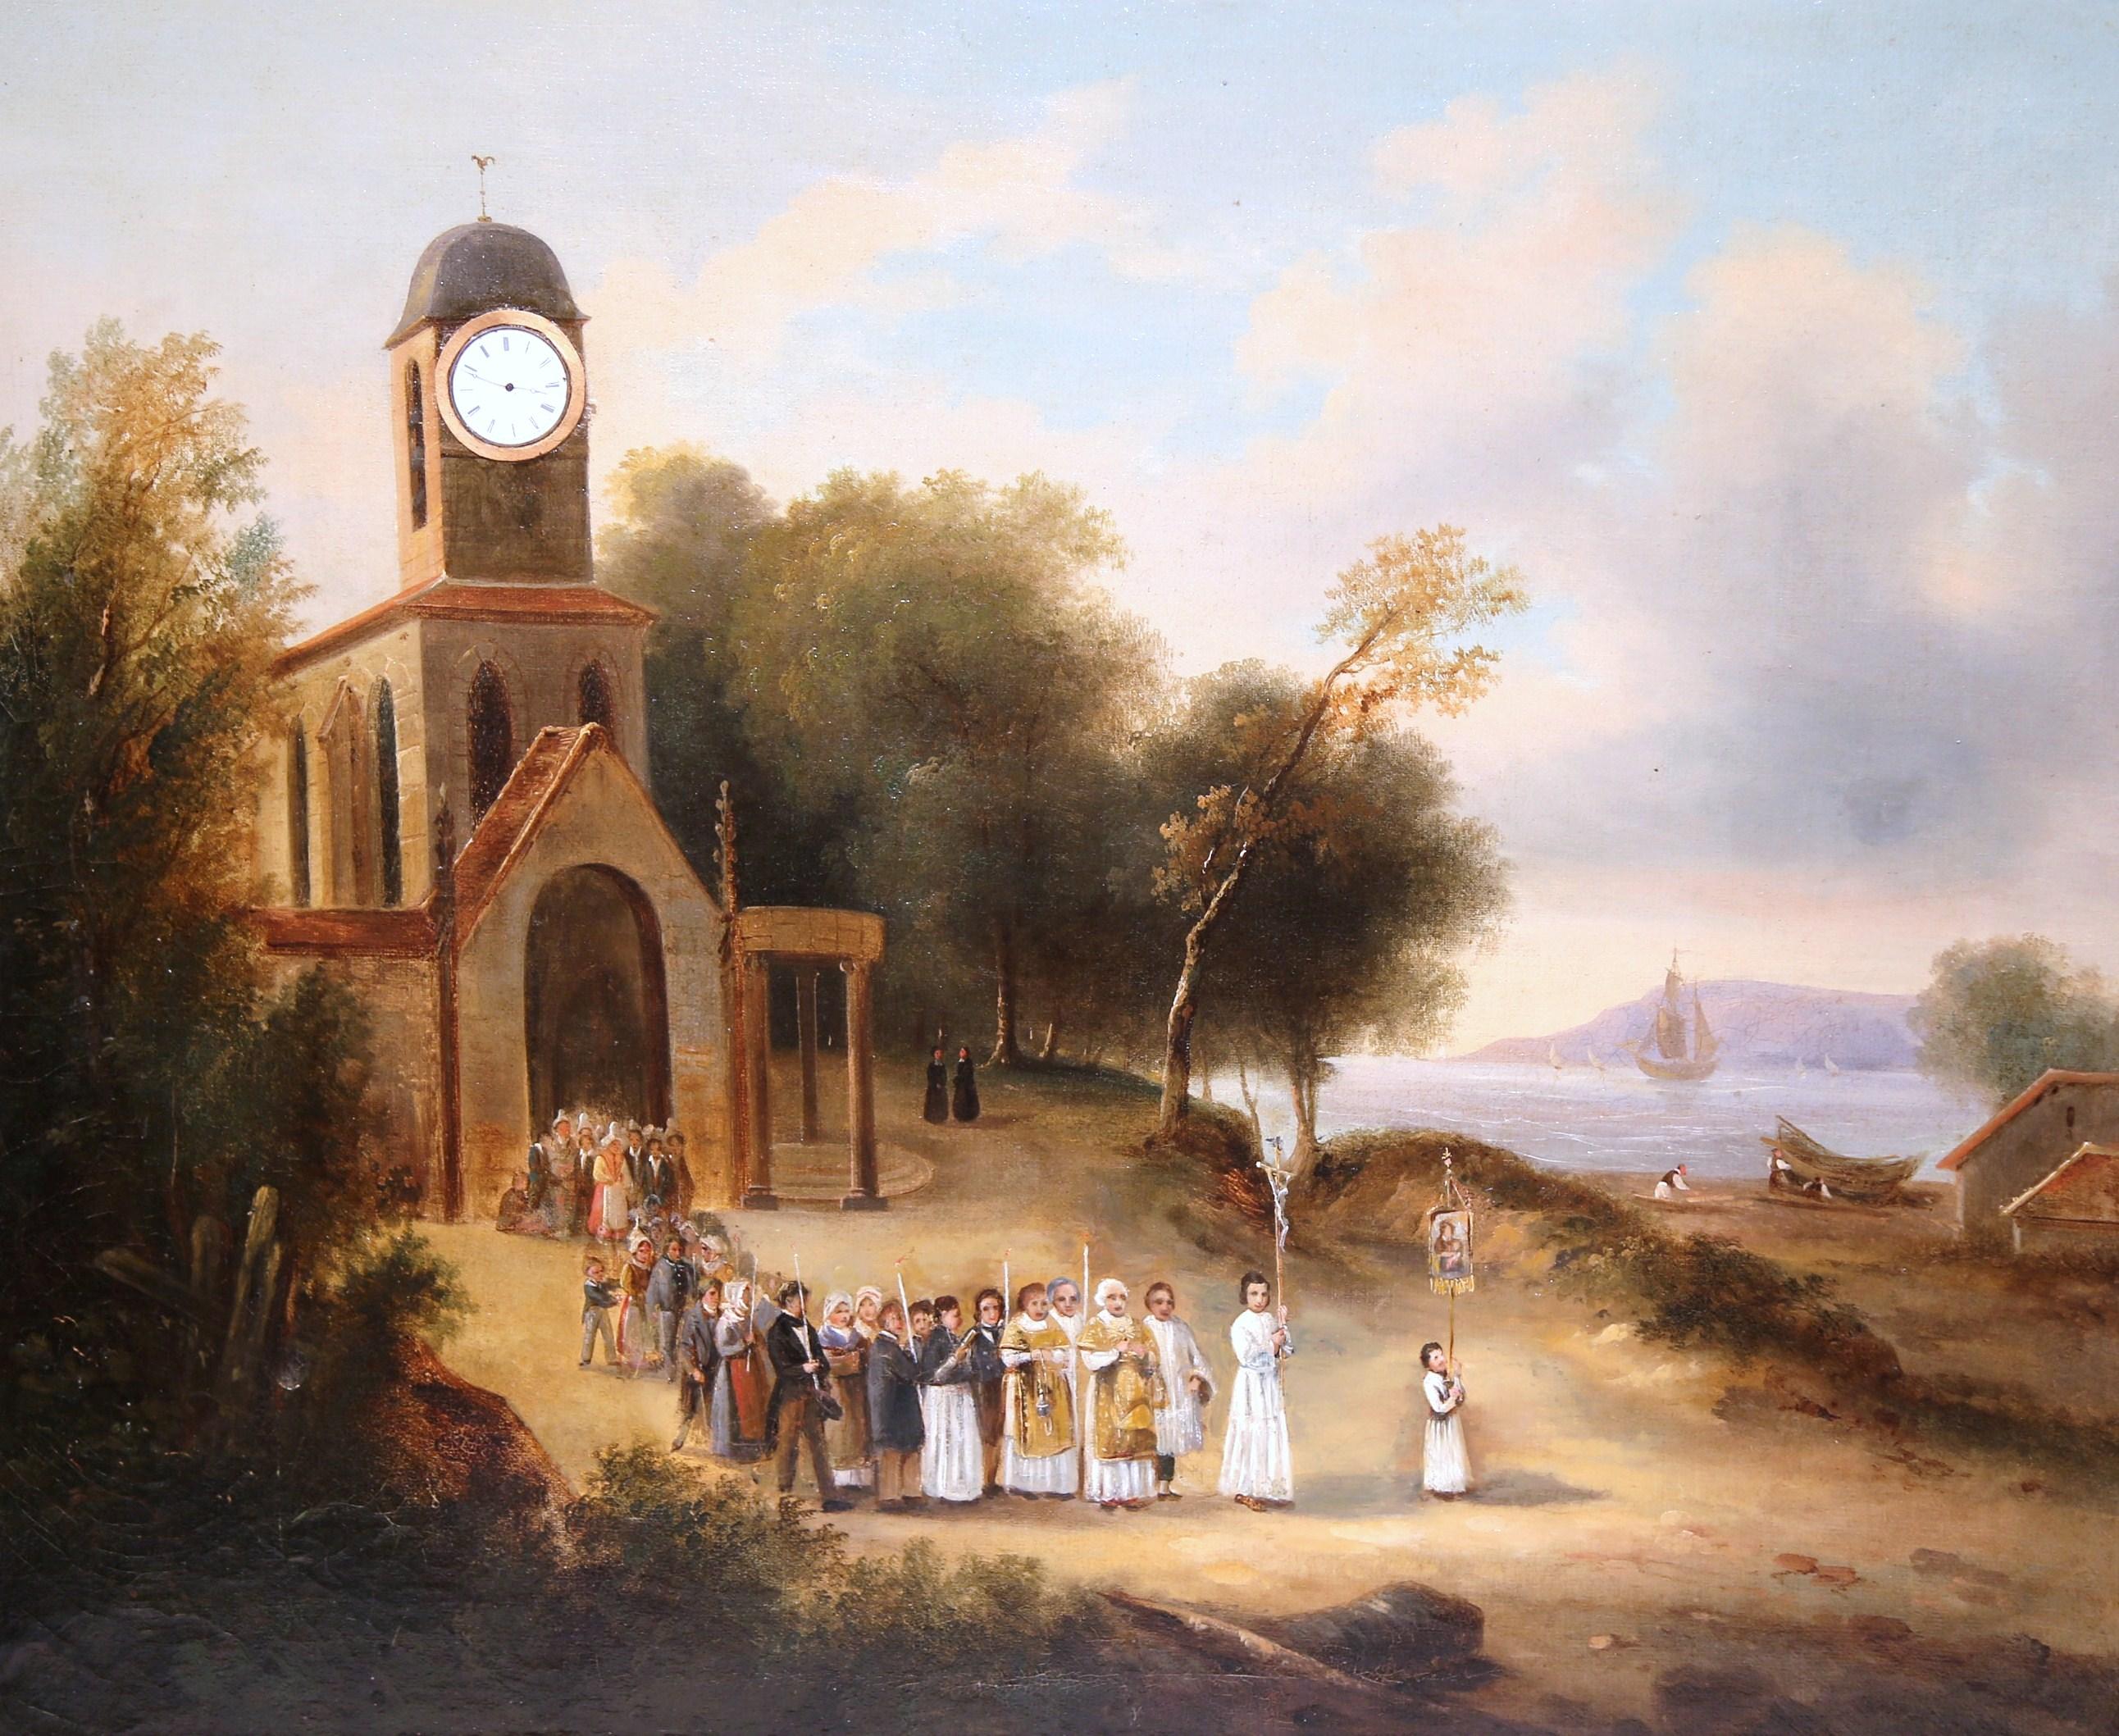 This fine antique oil on canvas painting was purchased in Versailles, France circa 1830. The scene depicts a religious scene 